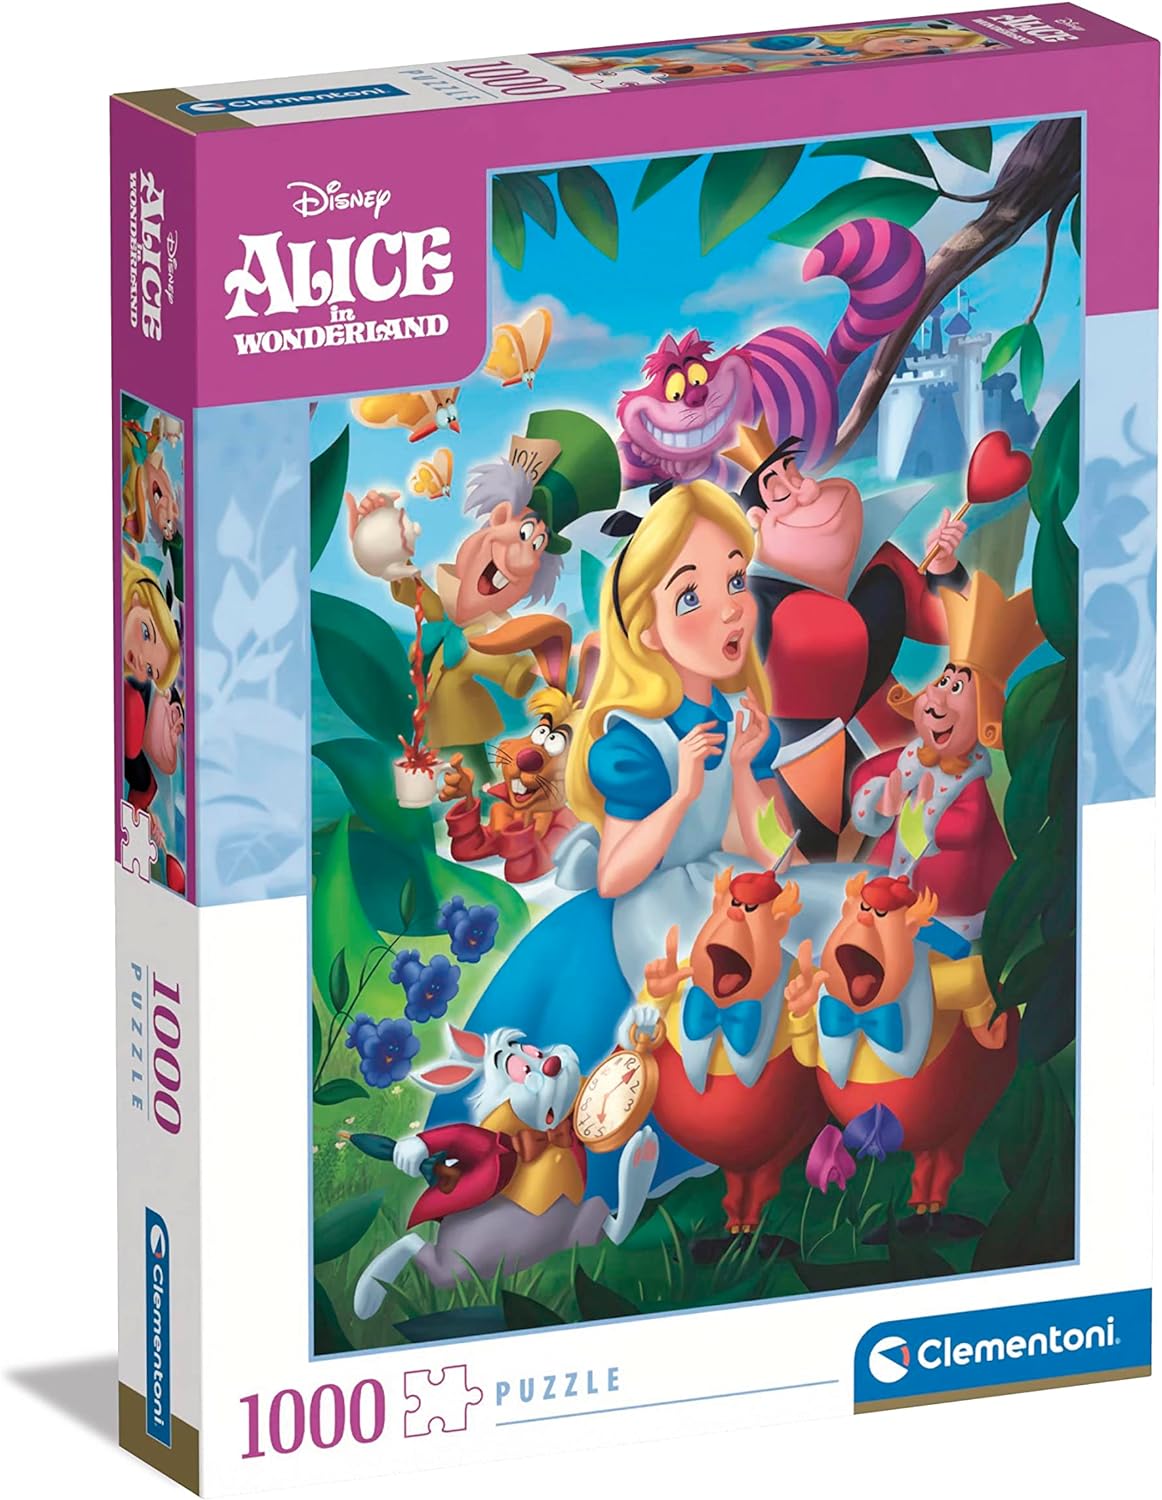 Clementoni Alice In Wonderland 1000 Piece Puzzle – The Puzzle Collections